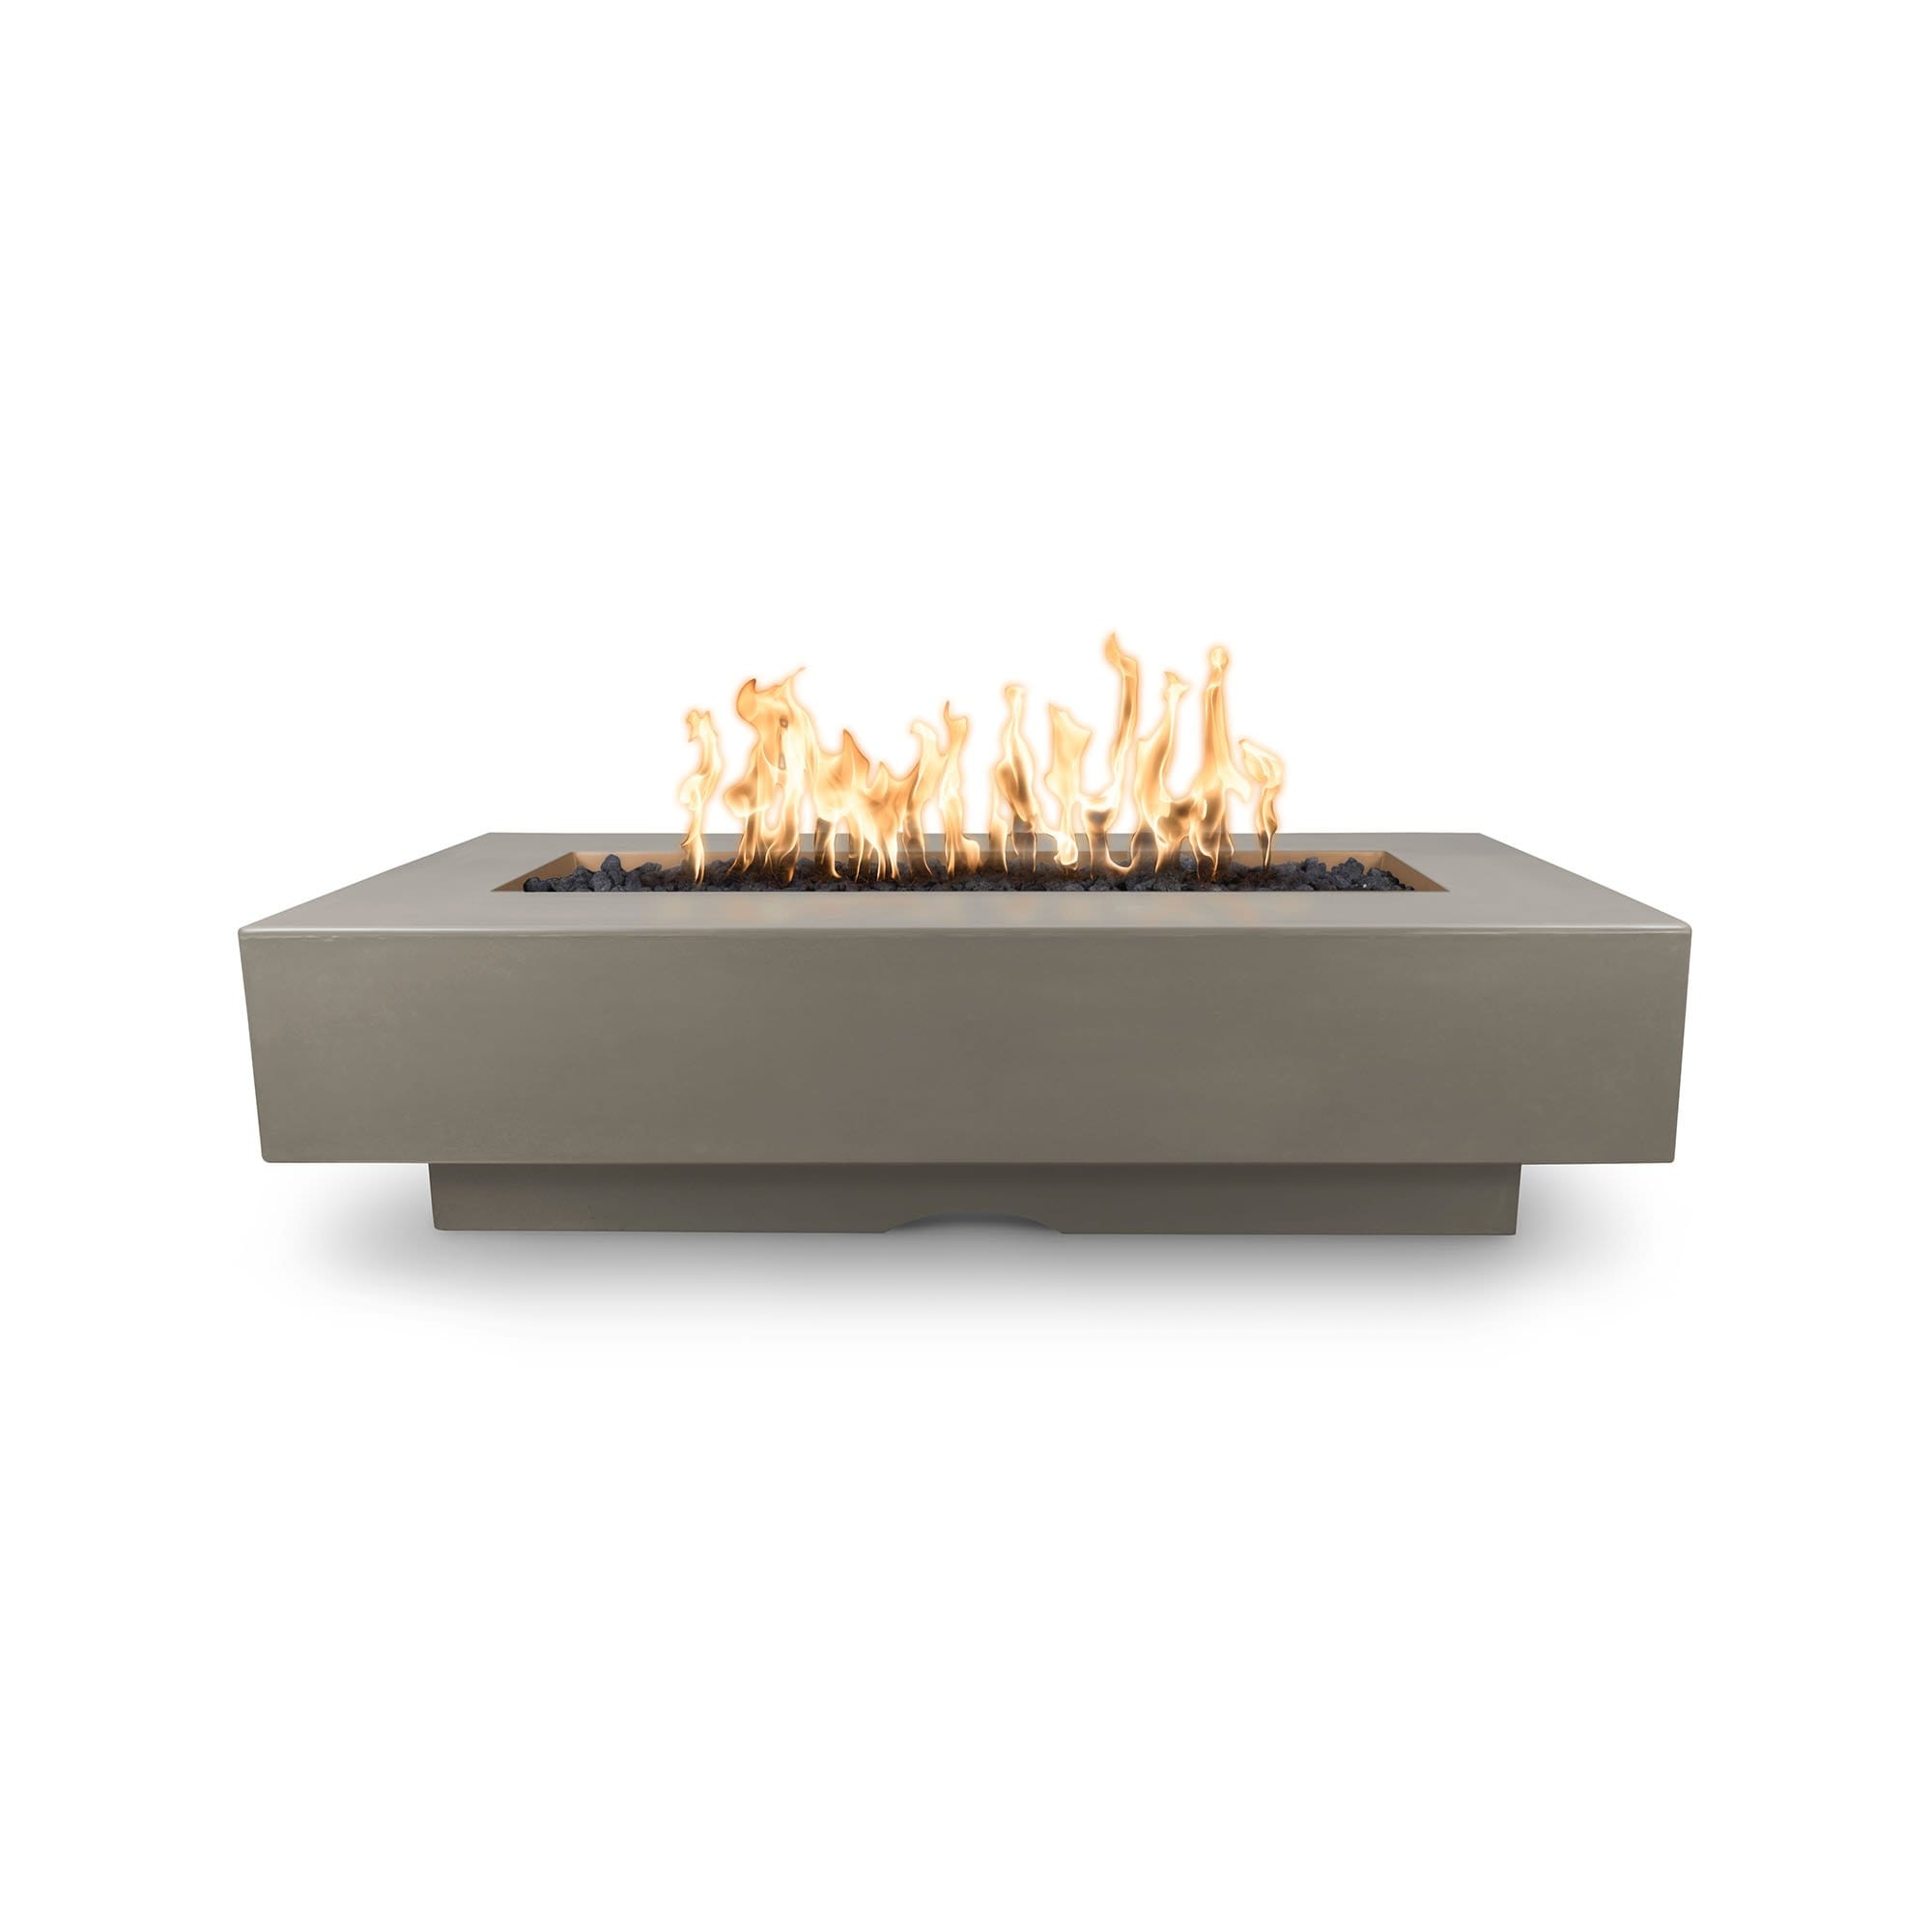 The Outdoor Plus Del Mar Concrete Fire Pit in color ash with flame on a white background